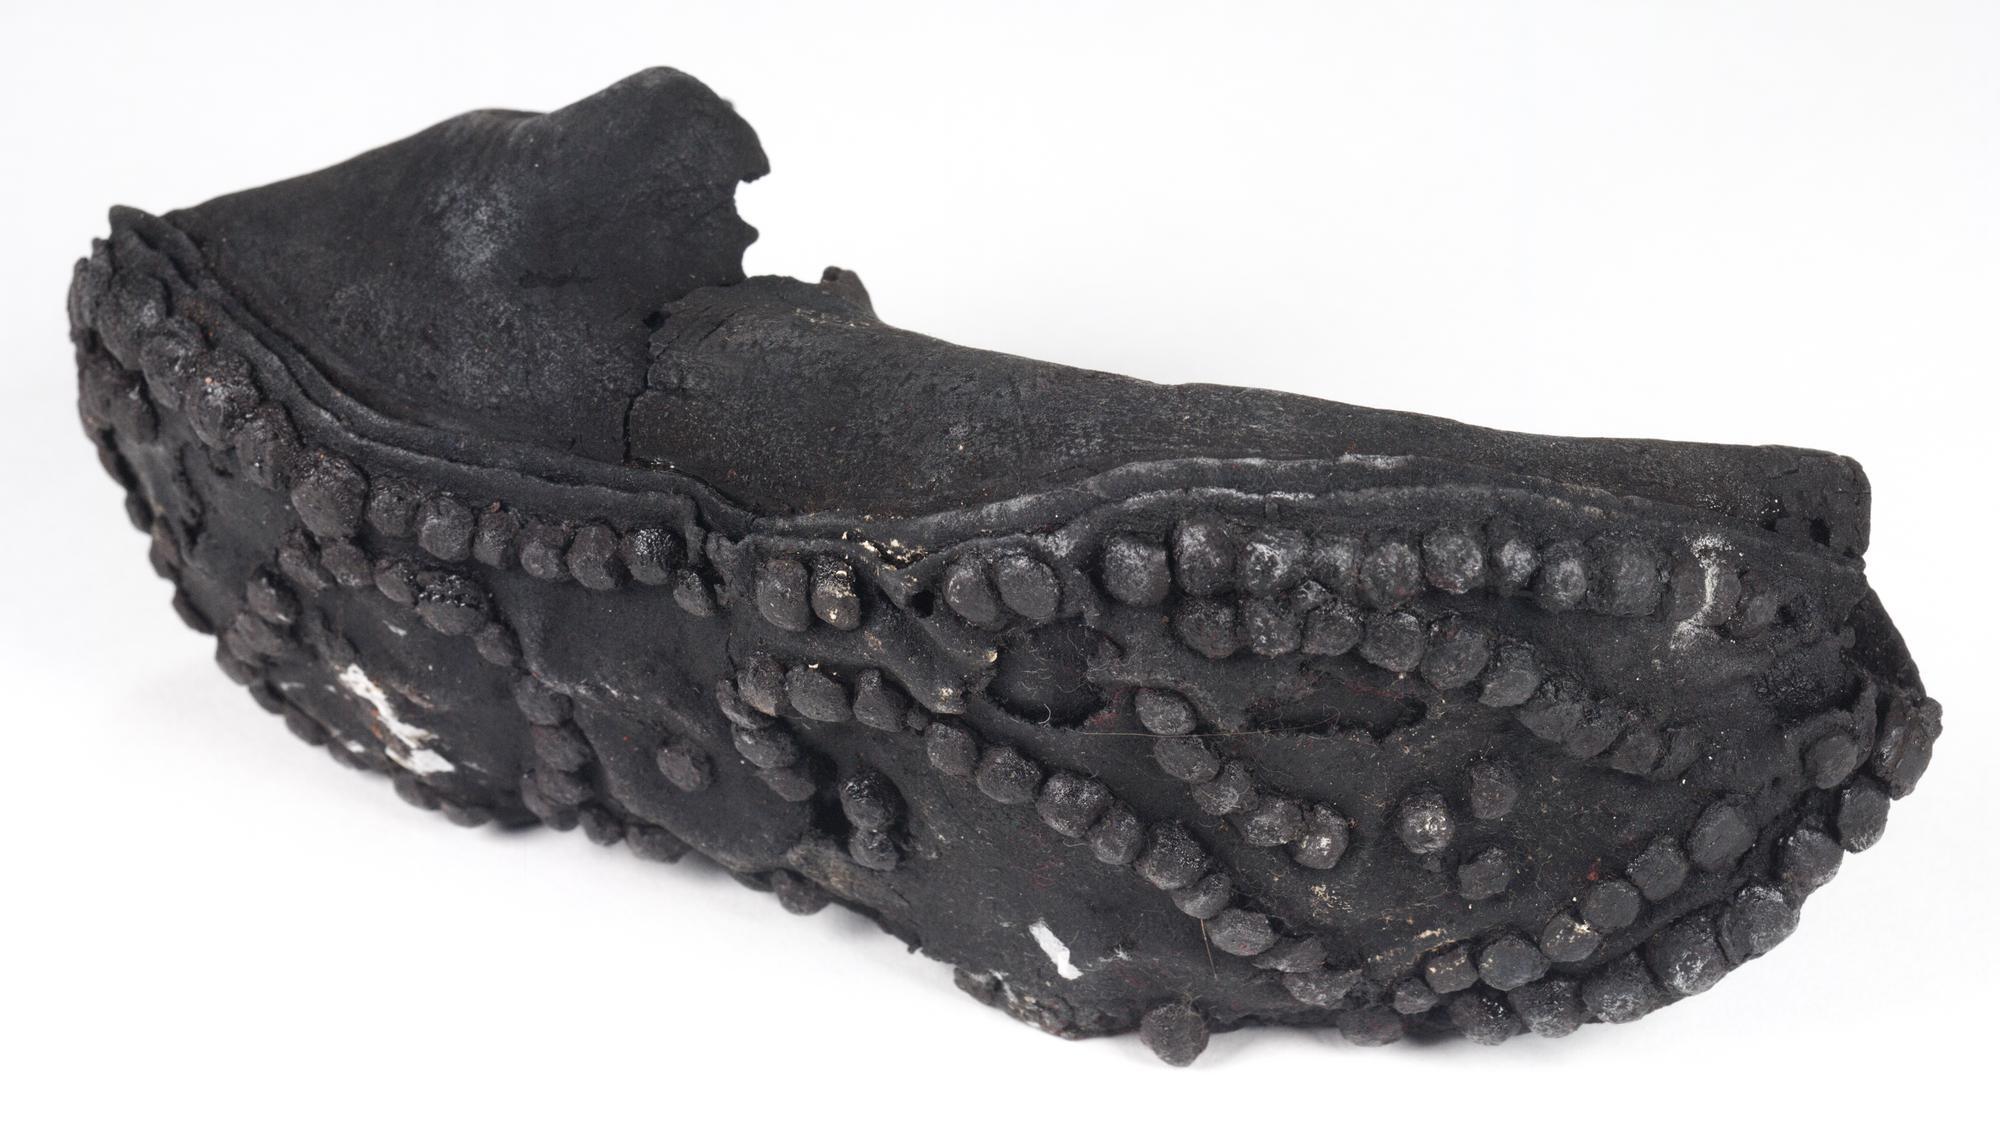 Image of Roman shoe or calceus of leather, with elaborate hobnail pattern, from the Roman site at Newstead, 80 - 180 AD © National Museums Scotland